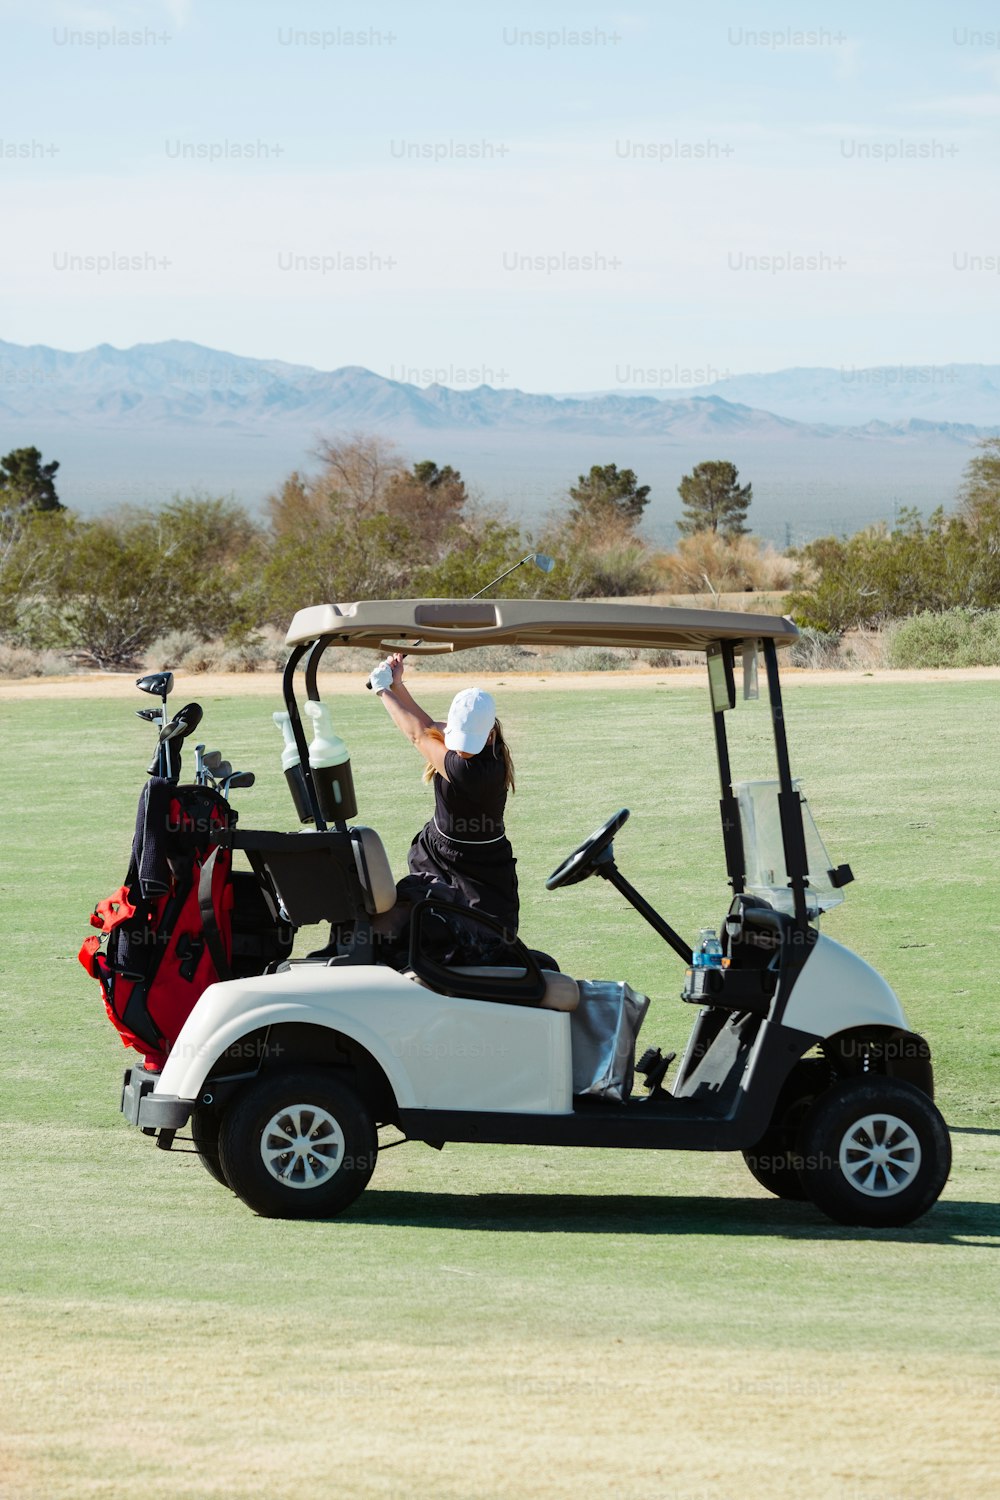 a person riding a golf cart in a field